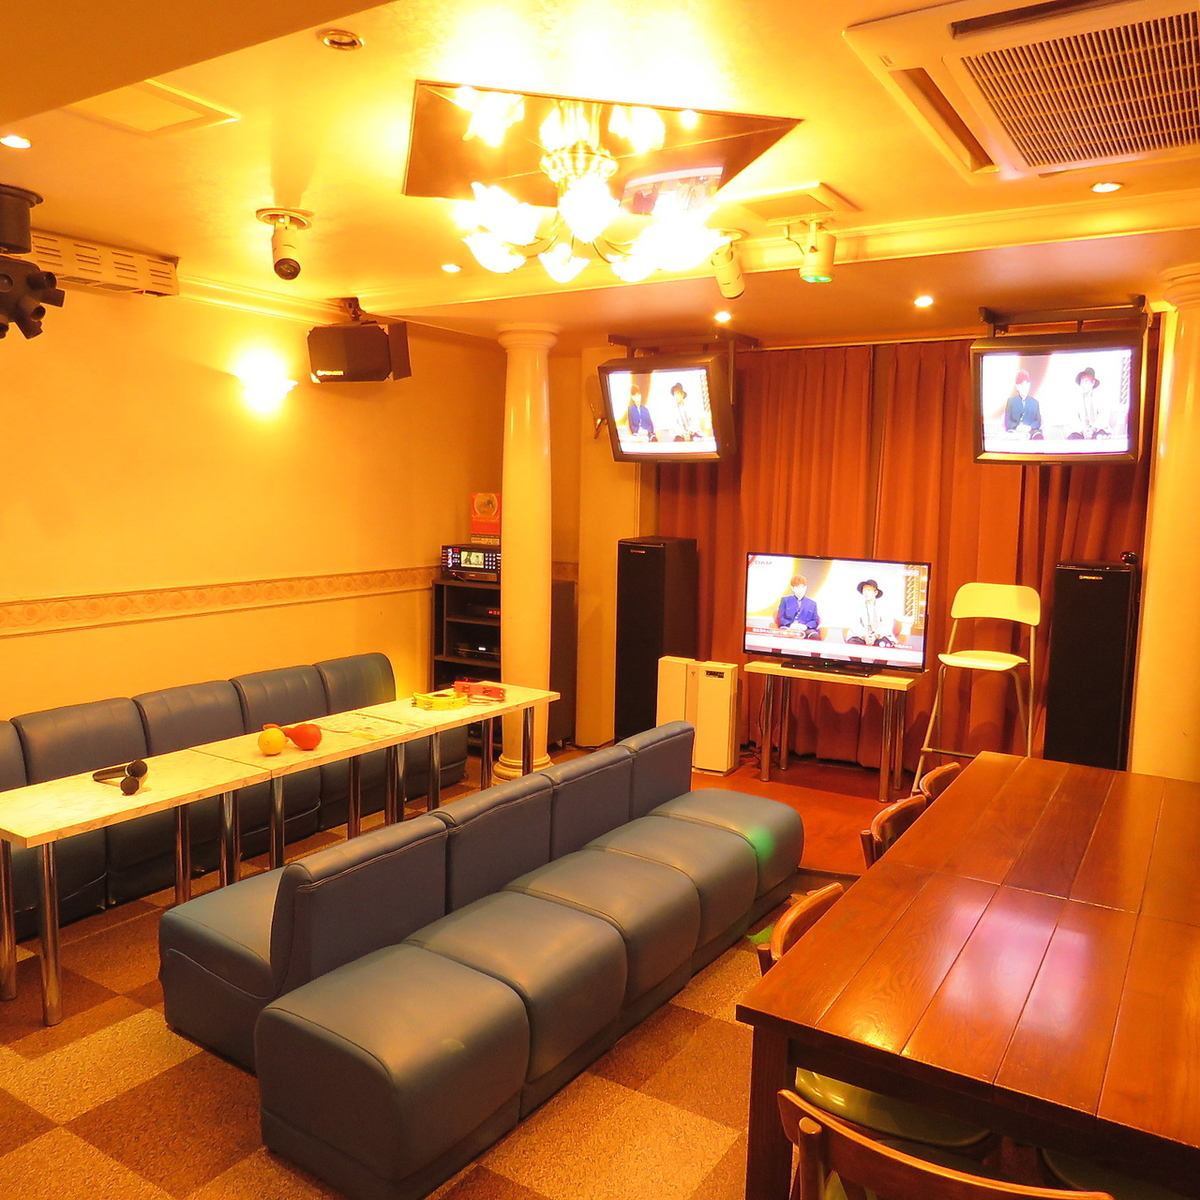 For launch and party ◎ A space where you can enjoy karaoke stylishly ♪ There is also an all-you-can-drink plan